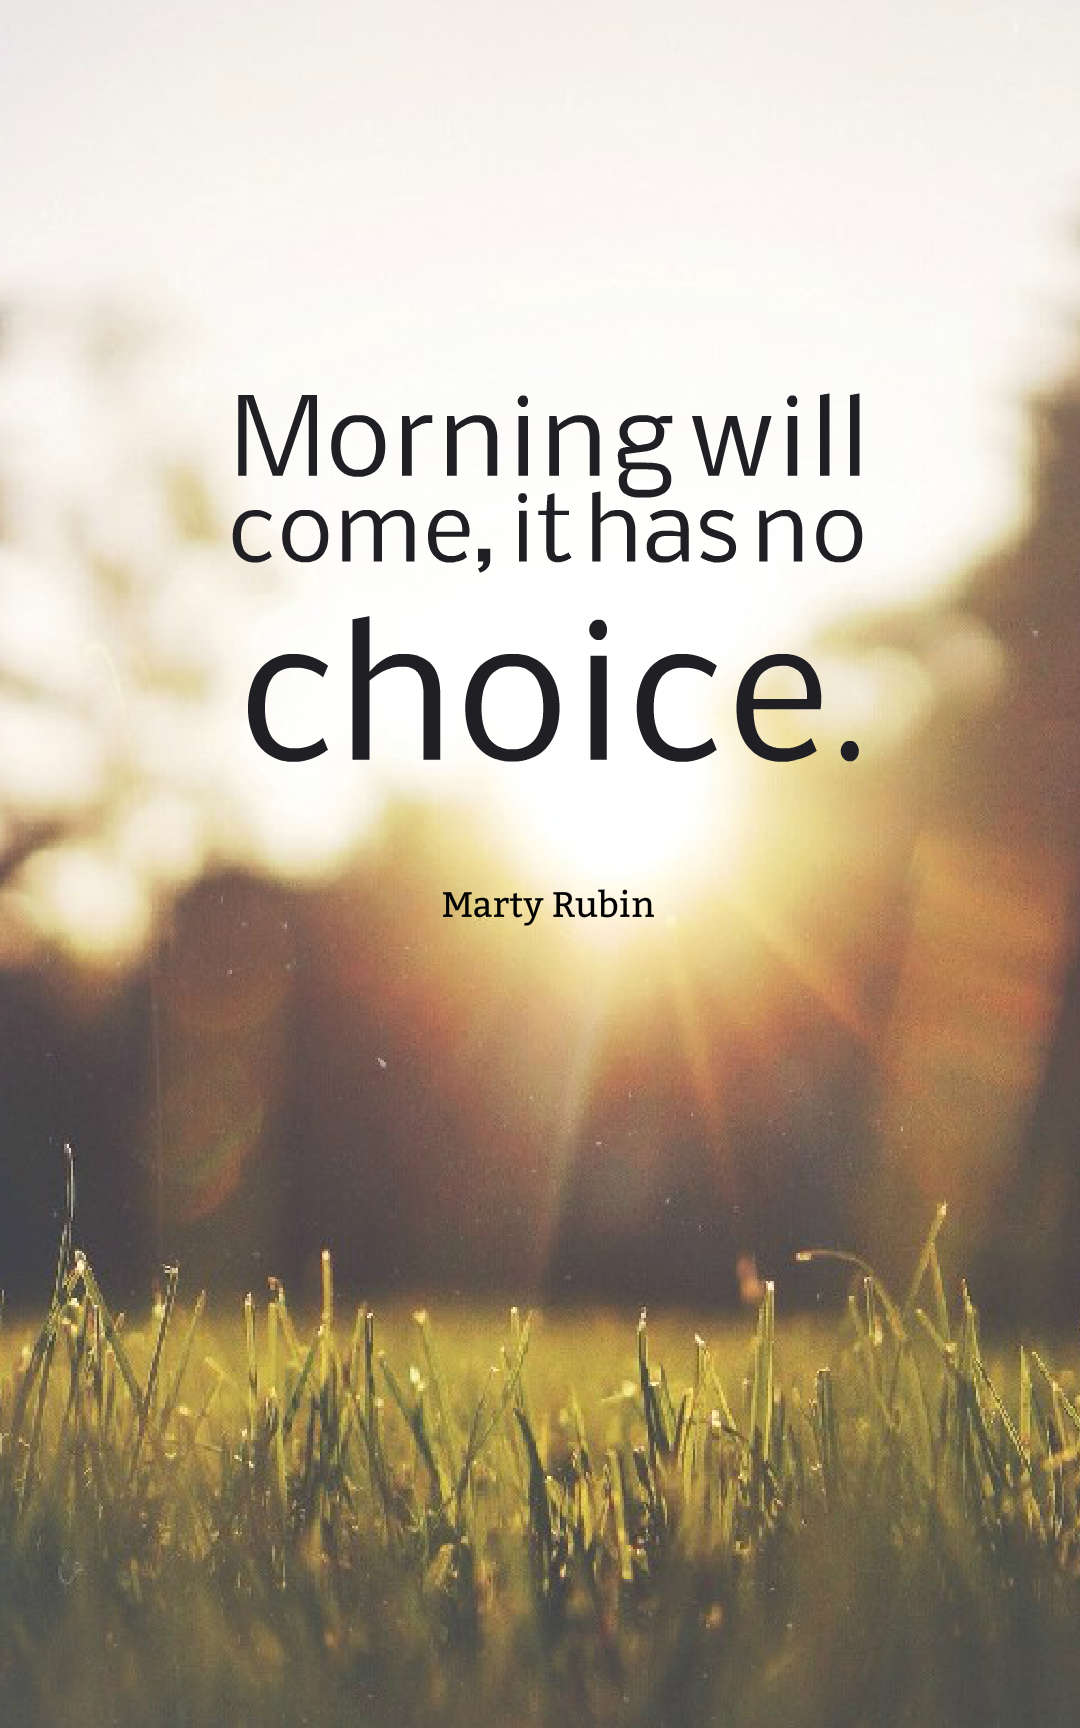 Morning will come, it has no choice.